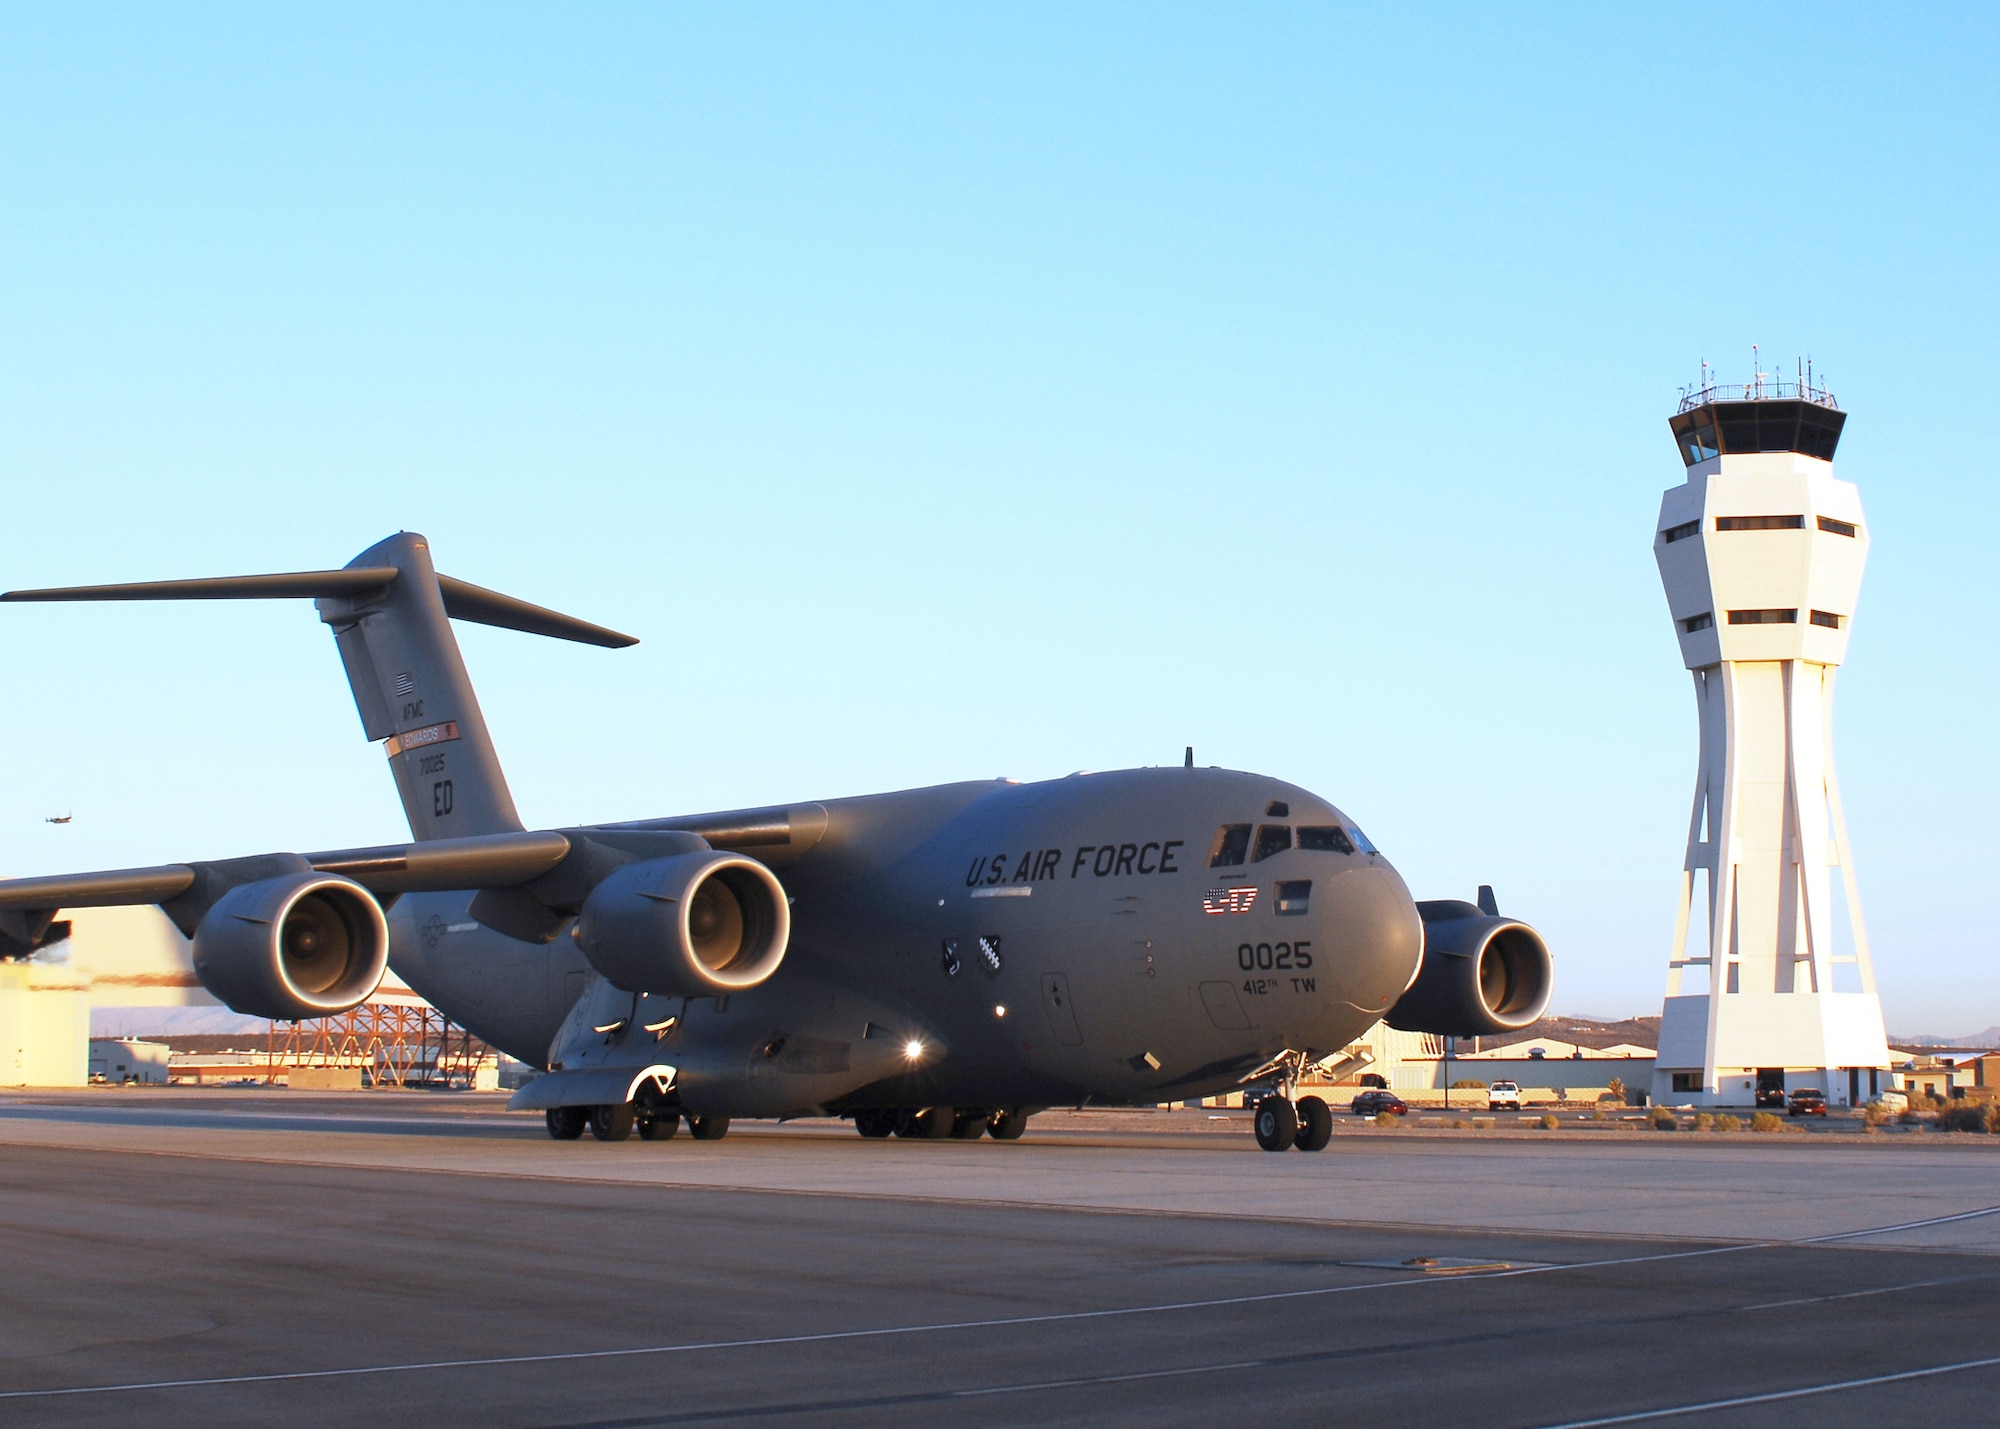 A C-17 Globemaster III taxis past the control tower at Edwards Air Force Base, Calif., on Oct. 19. The early-morning flight marked the first flight of the C-17 using a Fischer-Tropsch synthetic fuel blend in one of its engines. All four engines ran the fuel blend in subsequent tests. (Photo by Jim Shryne)